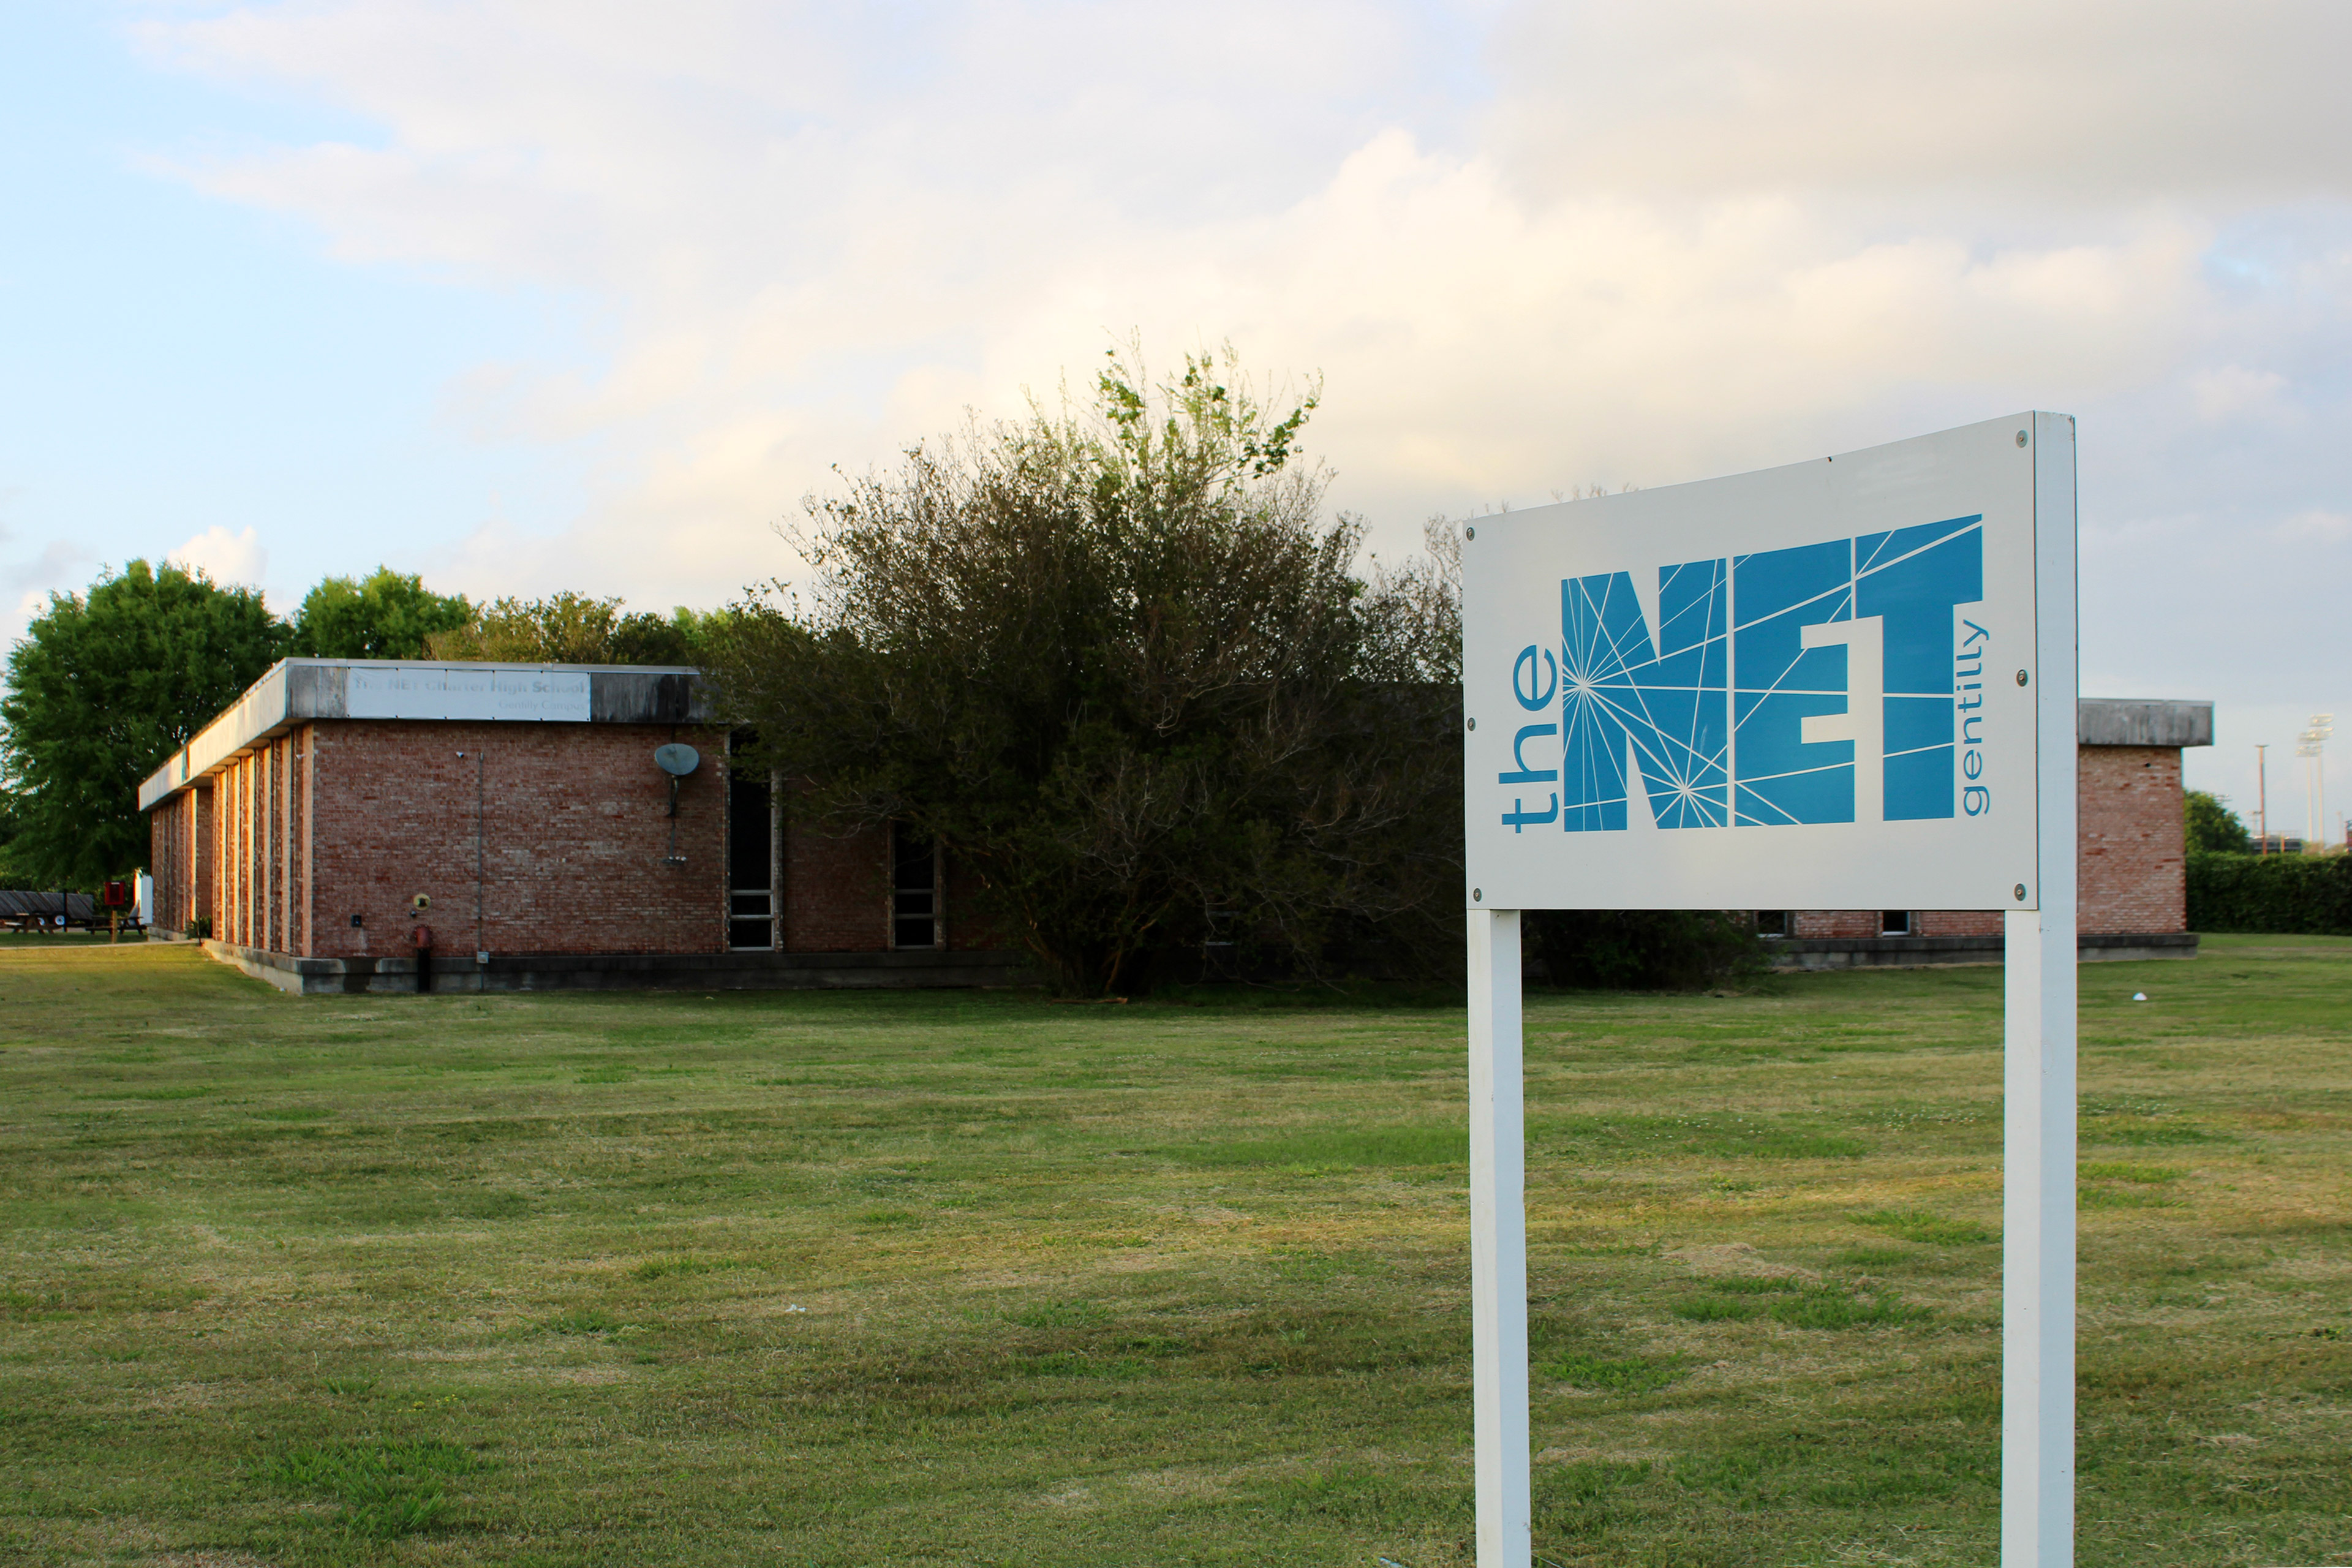 A photo outside the NET: Gentilly charter school.